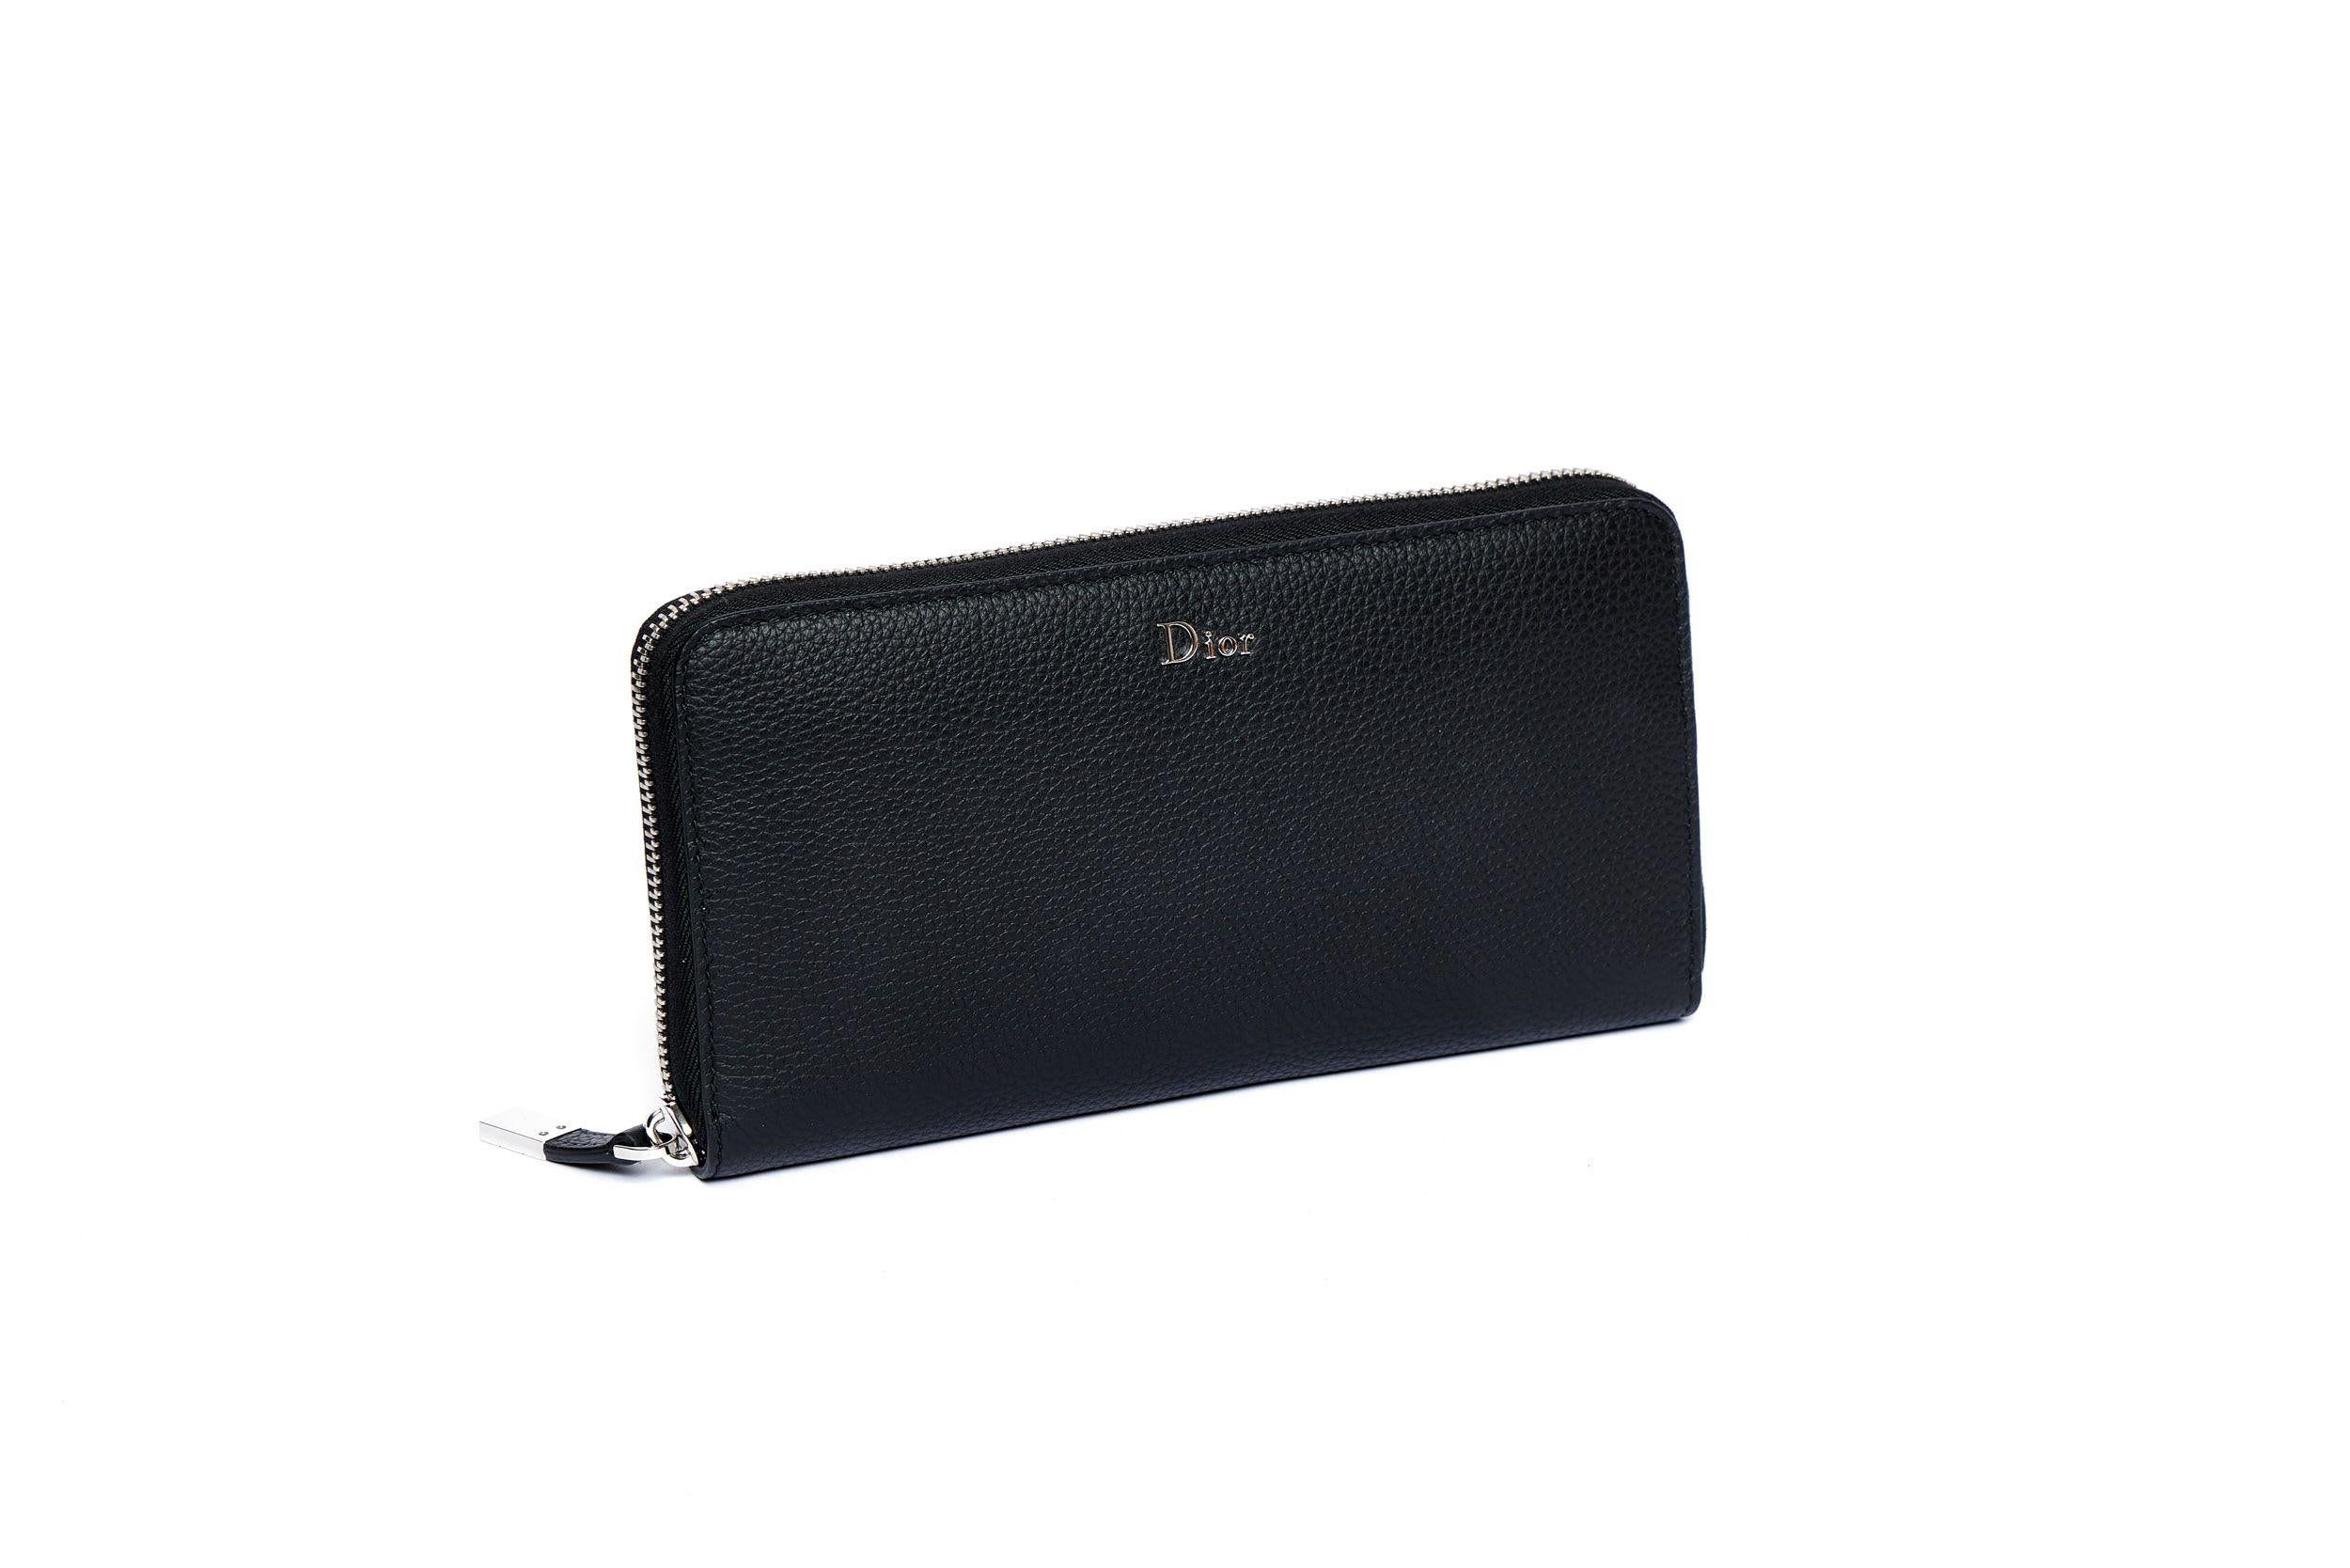 Black leather Dior wallet with a zip closure and silver metal hardware. In the inside are multiple card slots and compartments and a central zip compartment. The interior is also crafted of leather. The wallet is in excellent condition and comes